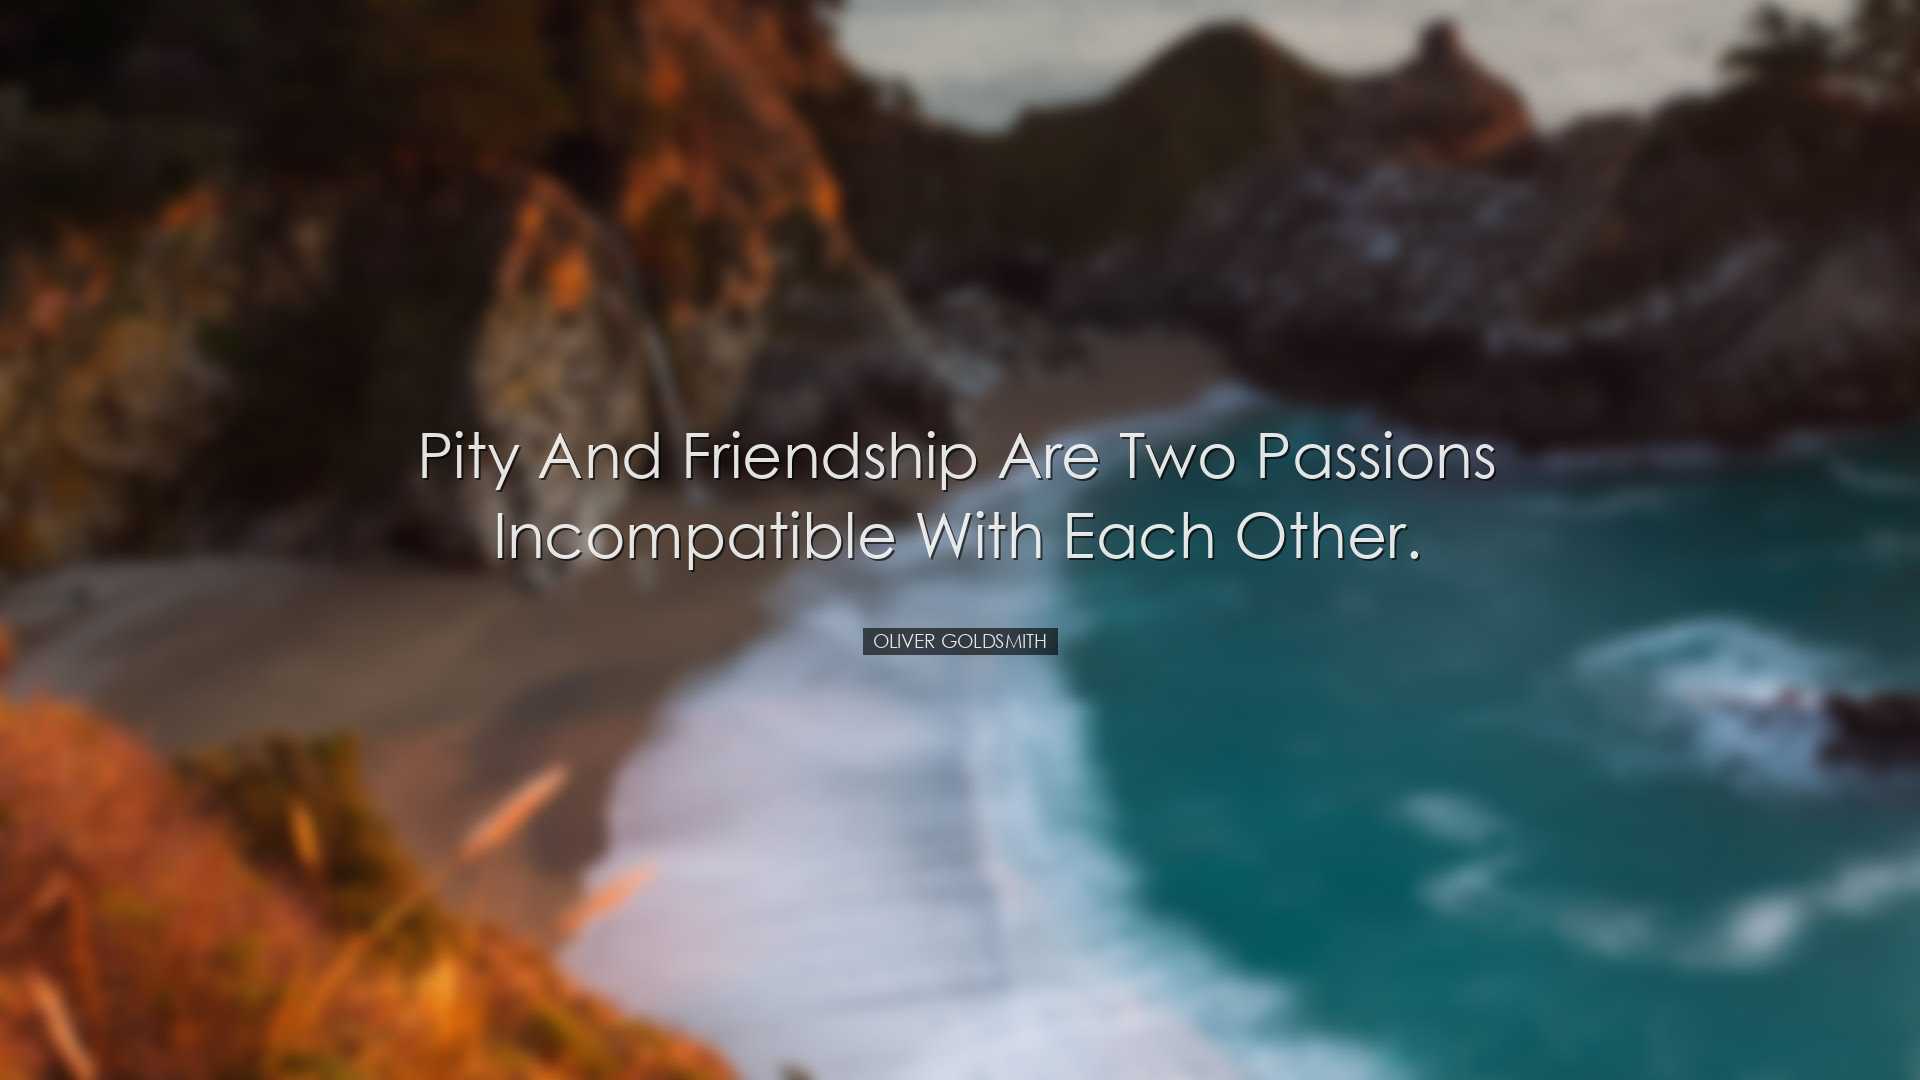 Pity and friendship are two passions incompatible with each other.